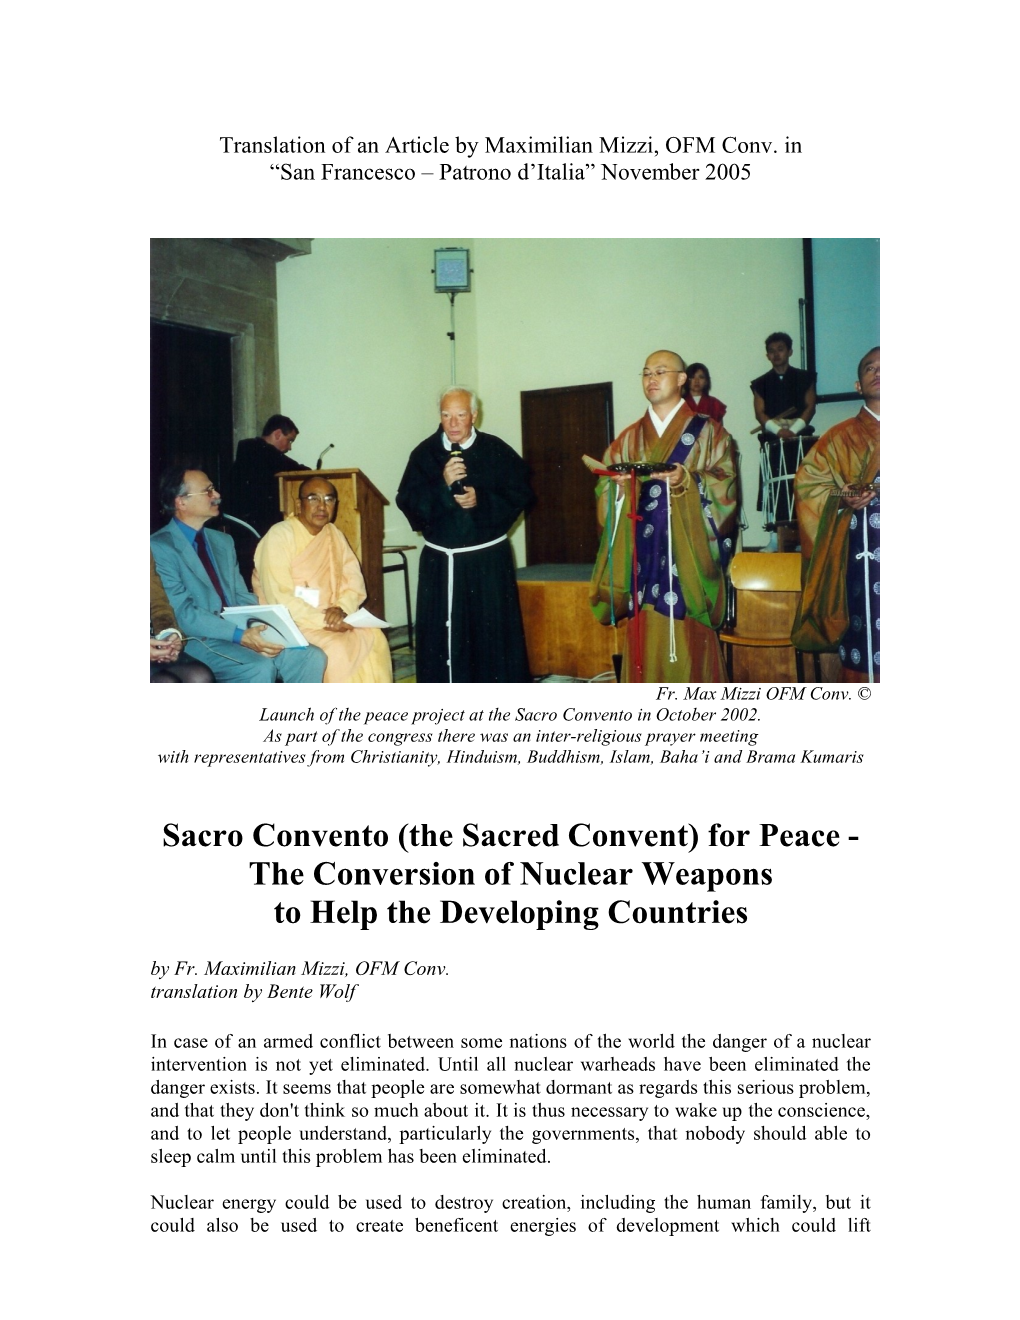 Sacro Convento (The Sacred Convent) for Peace - the Conversion of Nuclear Weapons to Help the Developing Countries by Fr